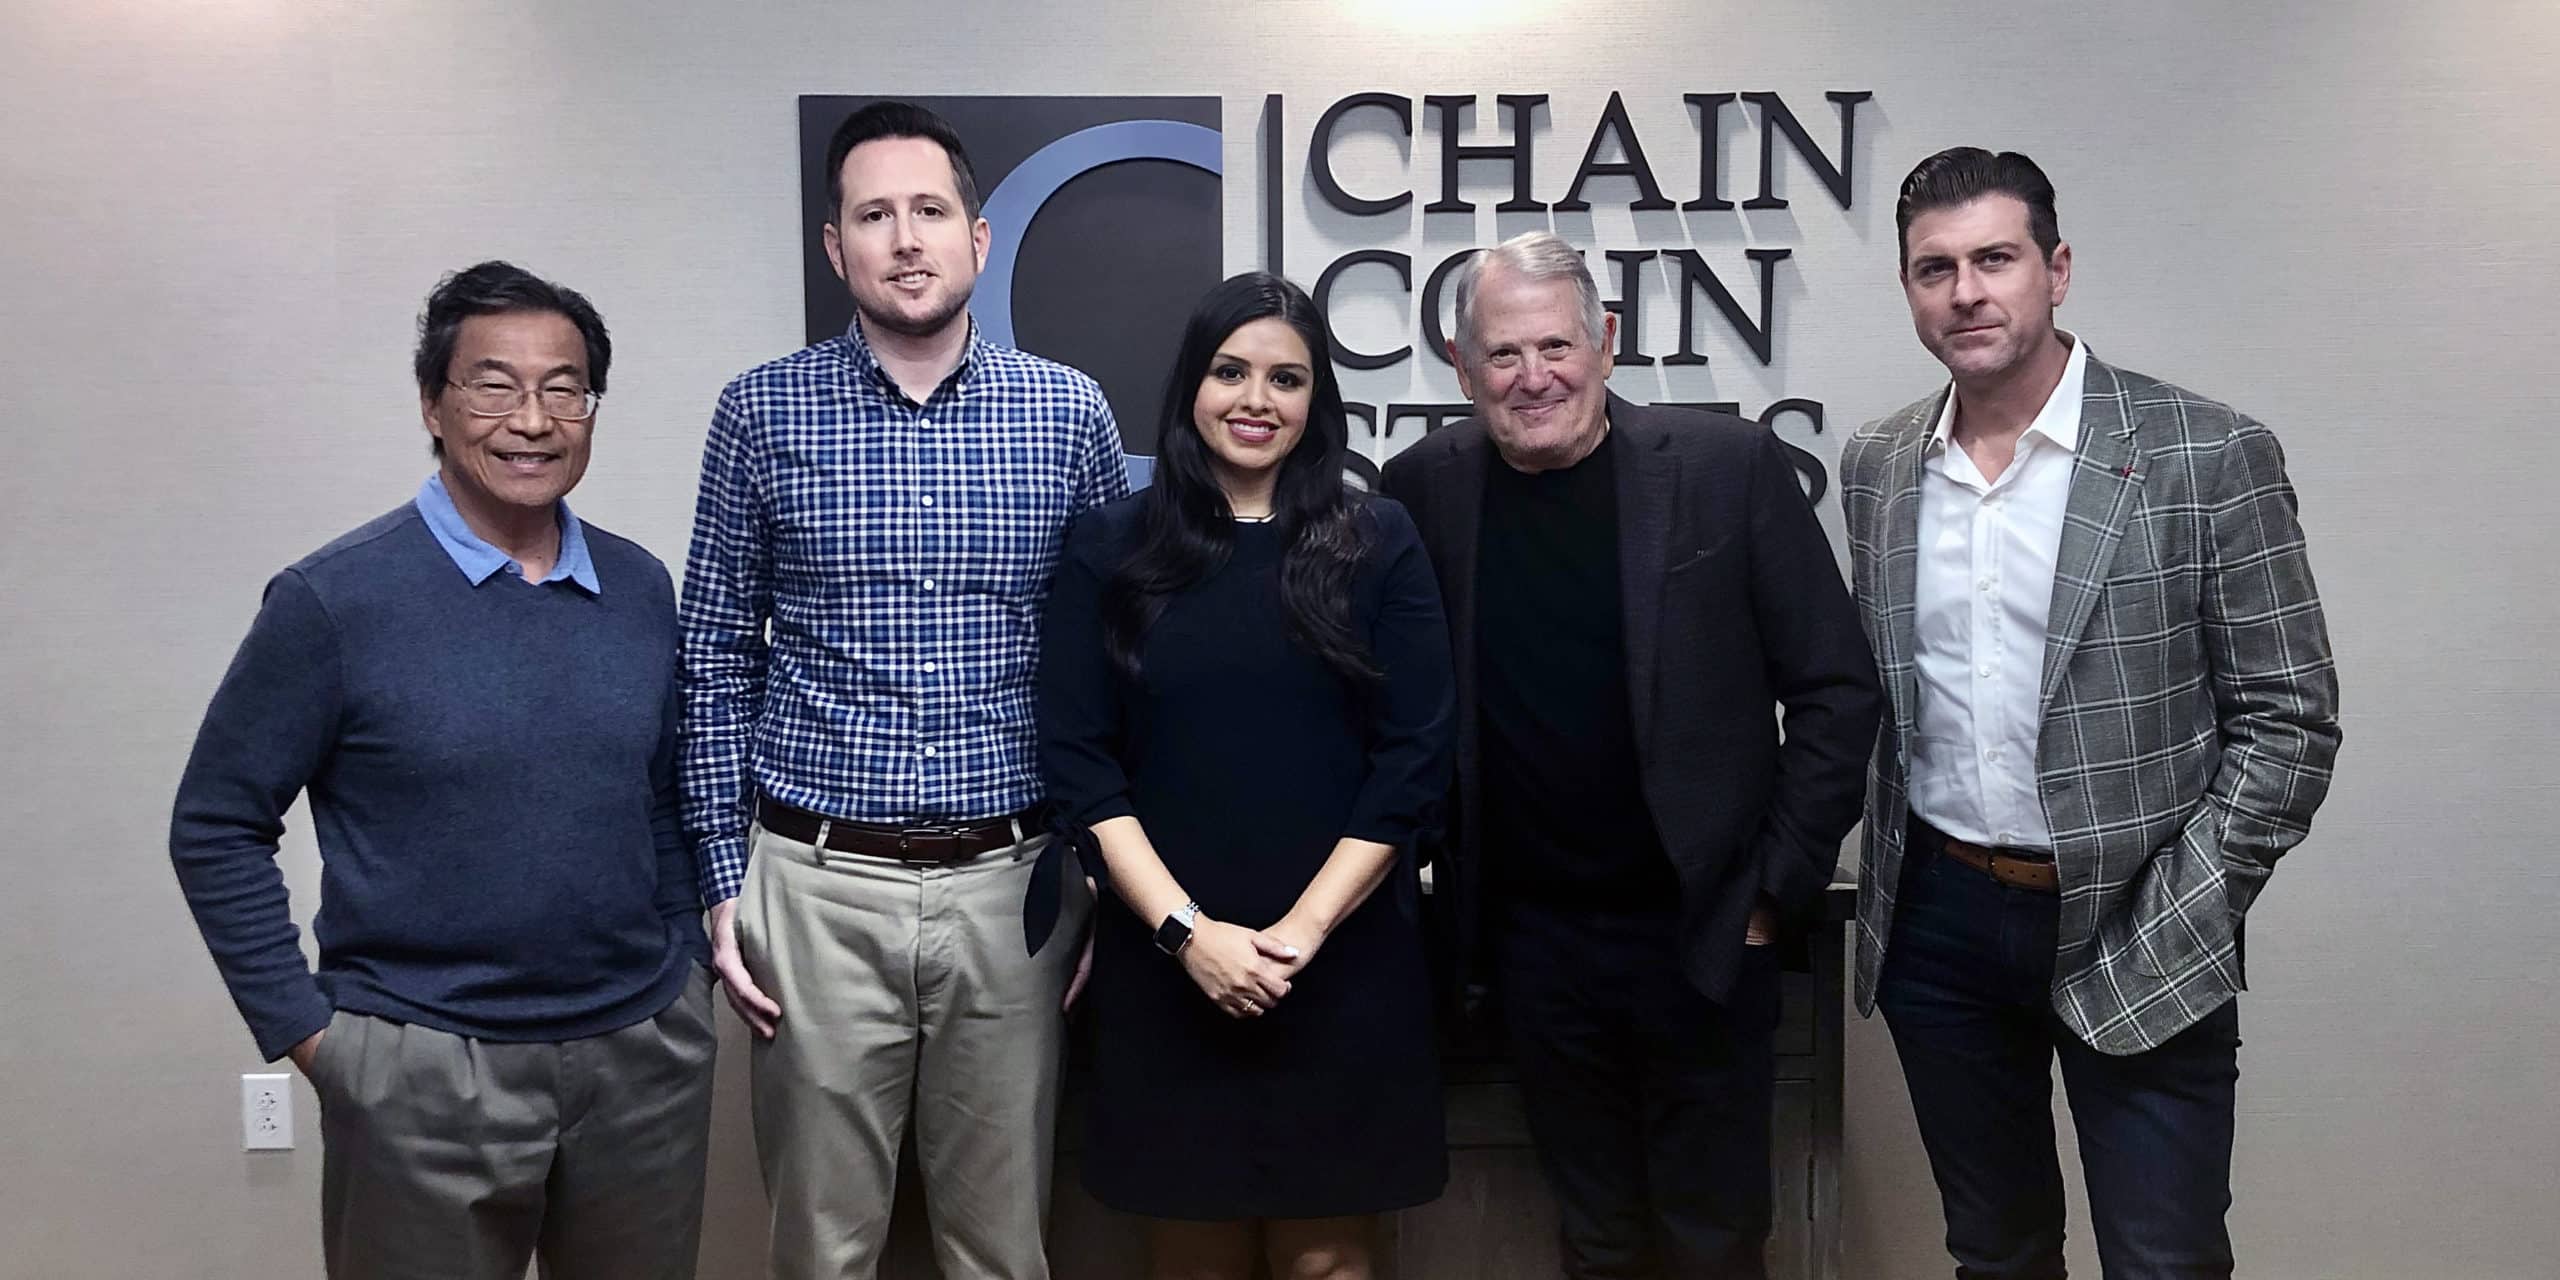 Chain | Cohn | Clark names two new law firm partners